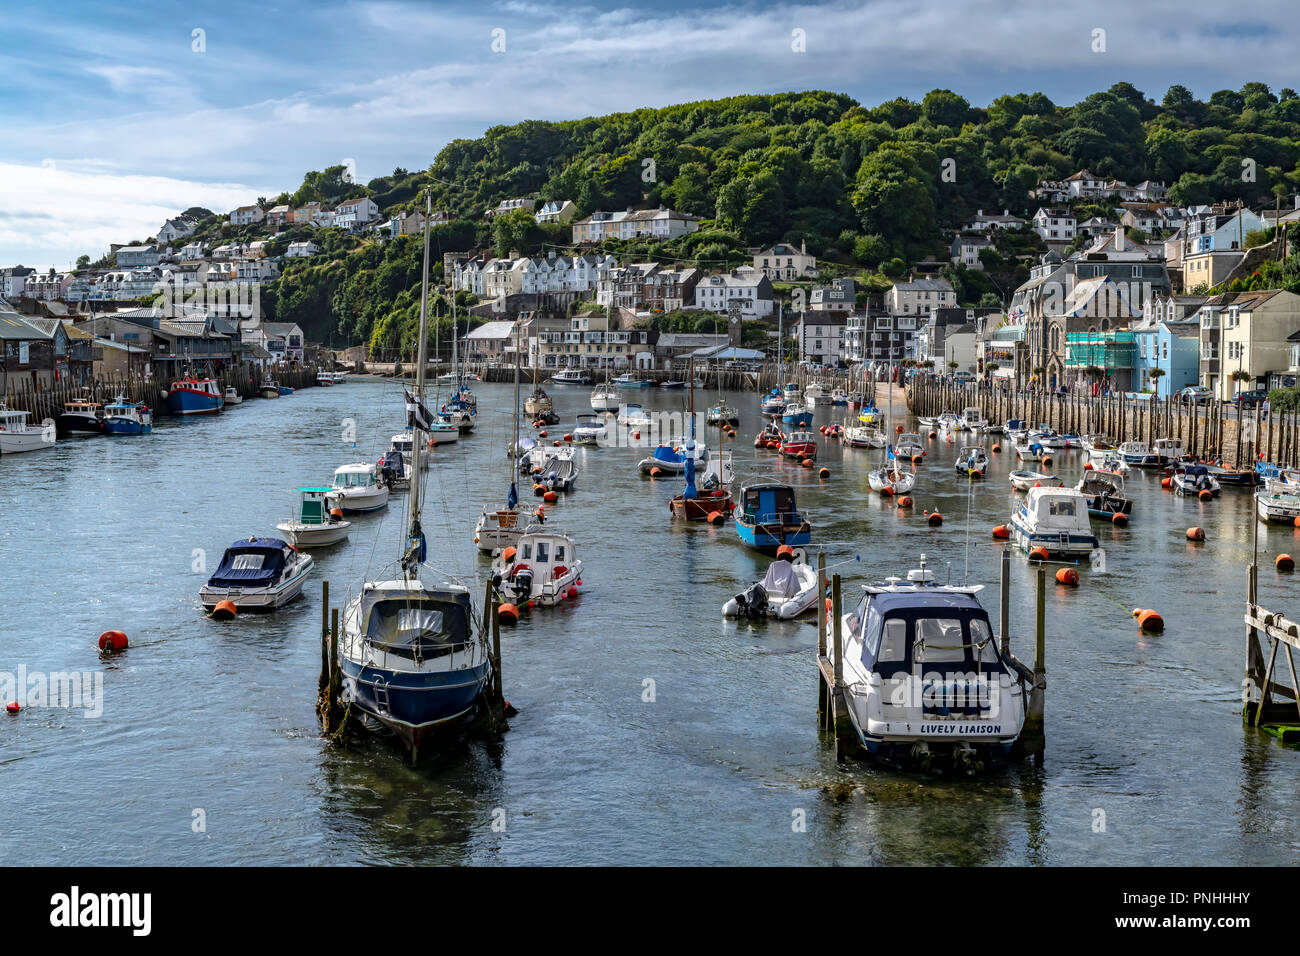 LOOE, Cornwall, England, UK - September 10 2018: The town of Looe Estuary in high tide with fishing boats and Yachts. Looe a very popular fishing port Stock Photo